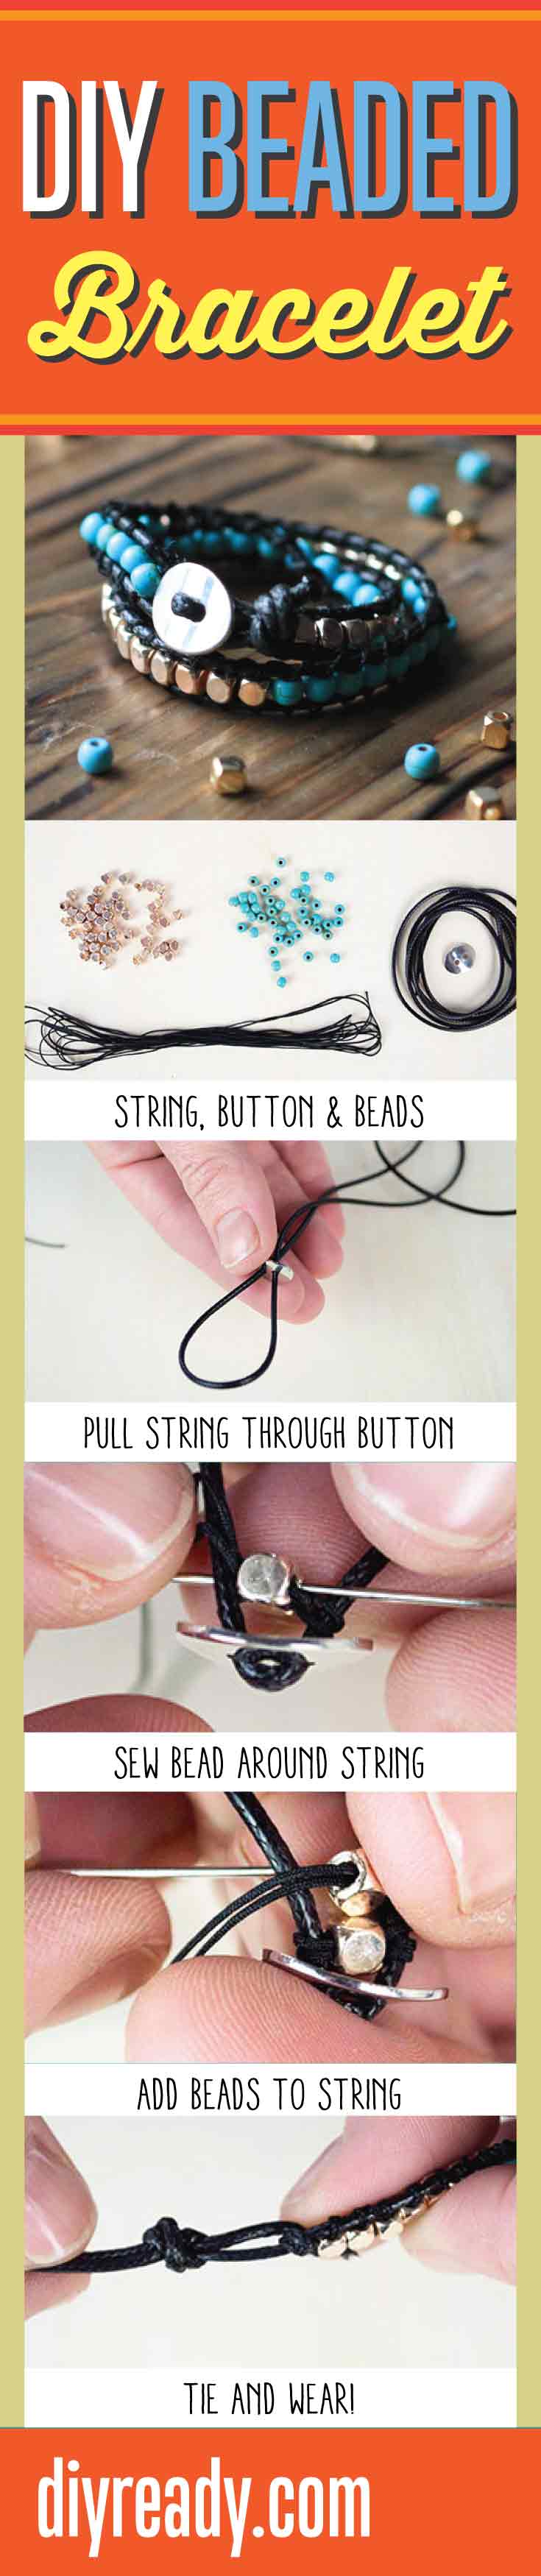 DIY Beaded Bracelet Tutorial | Step by Step Instructions for Easy DIY Jewelry Making by DIY Projects https://diyprojects.com/diy-beaded-bracelets/